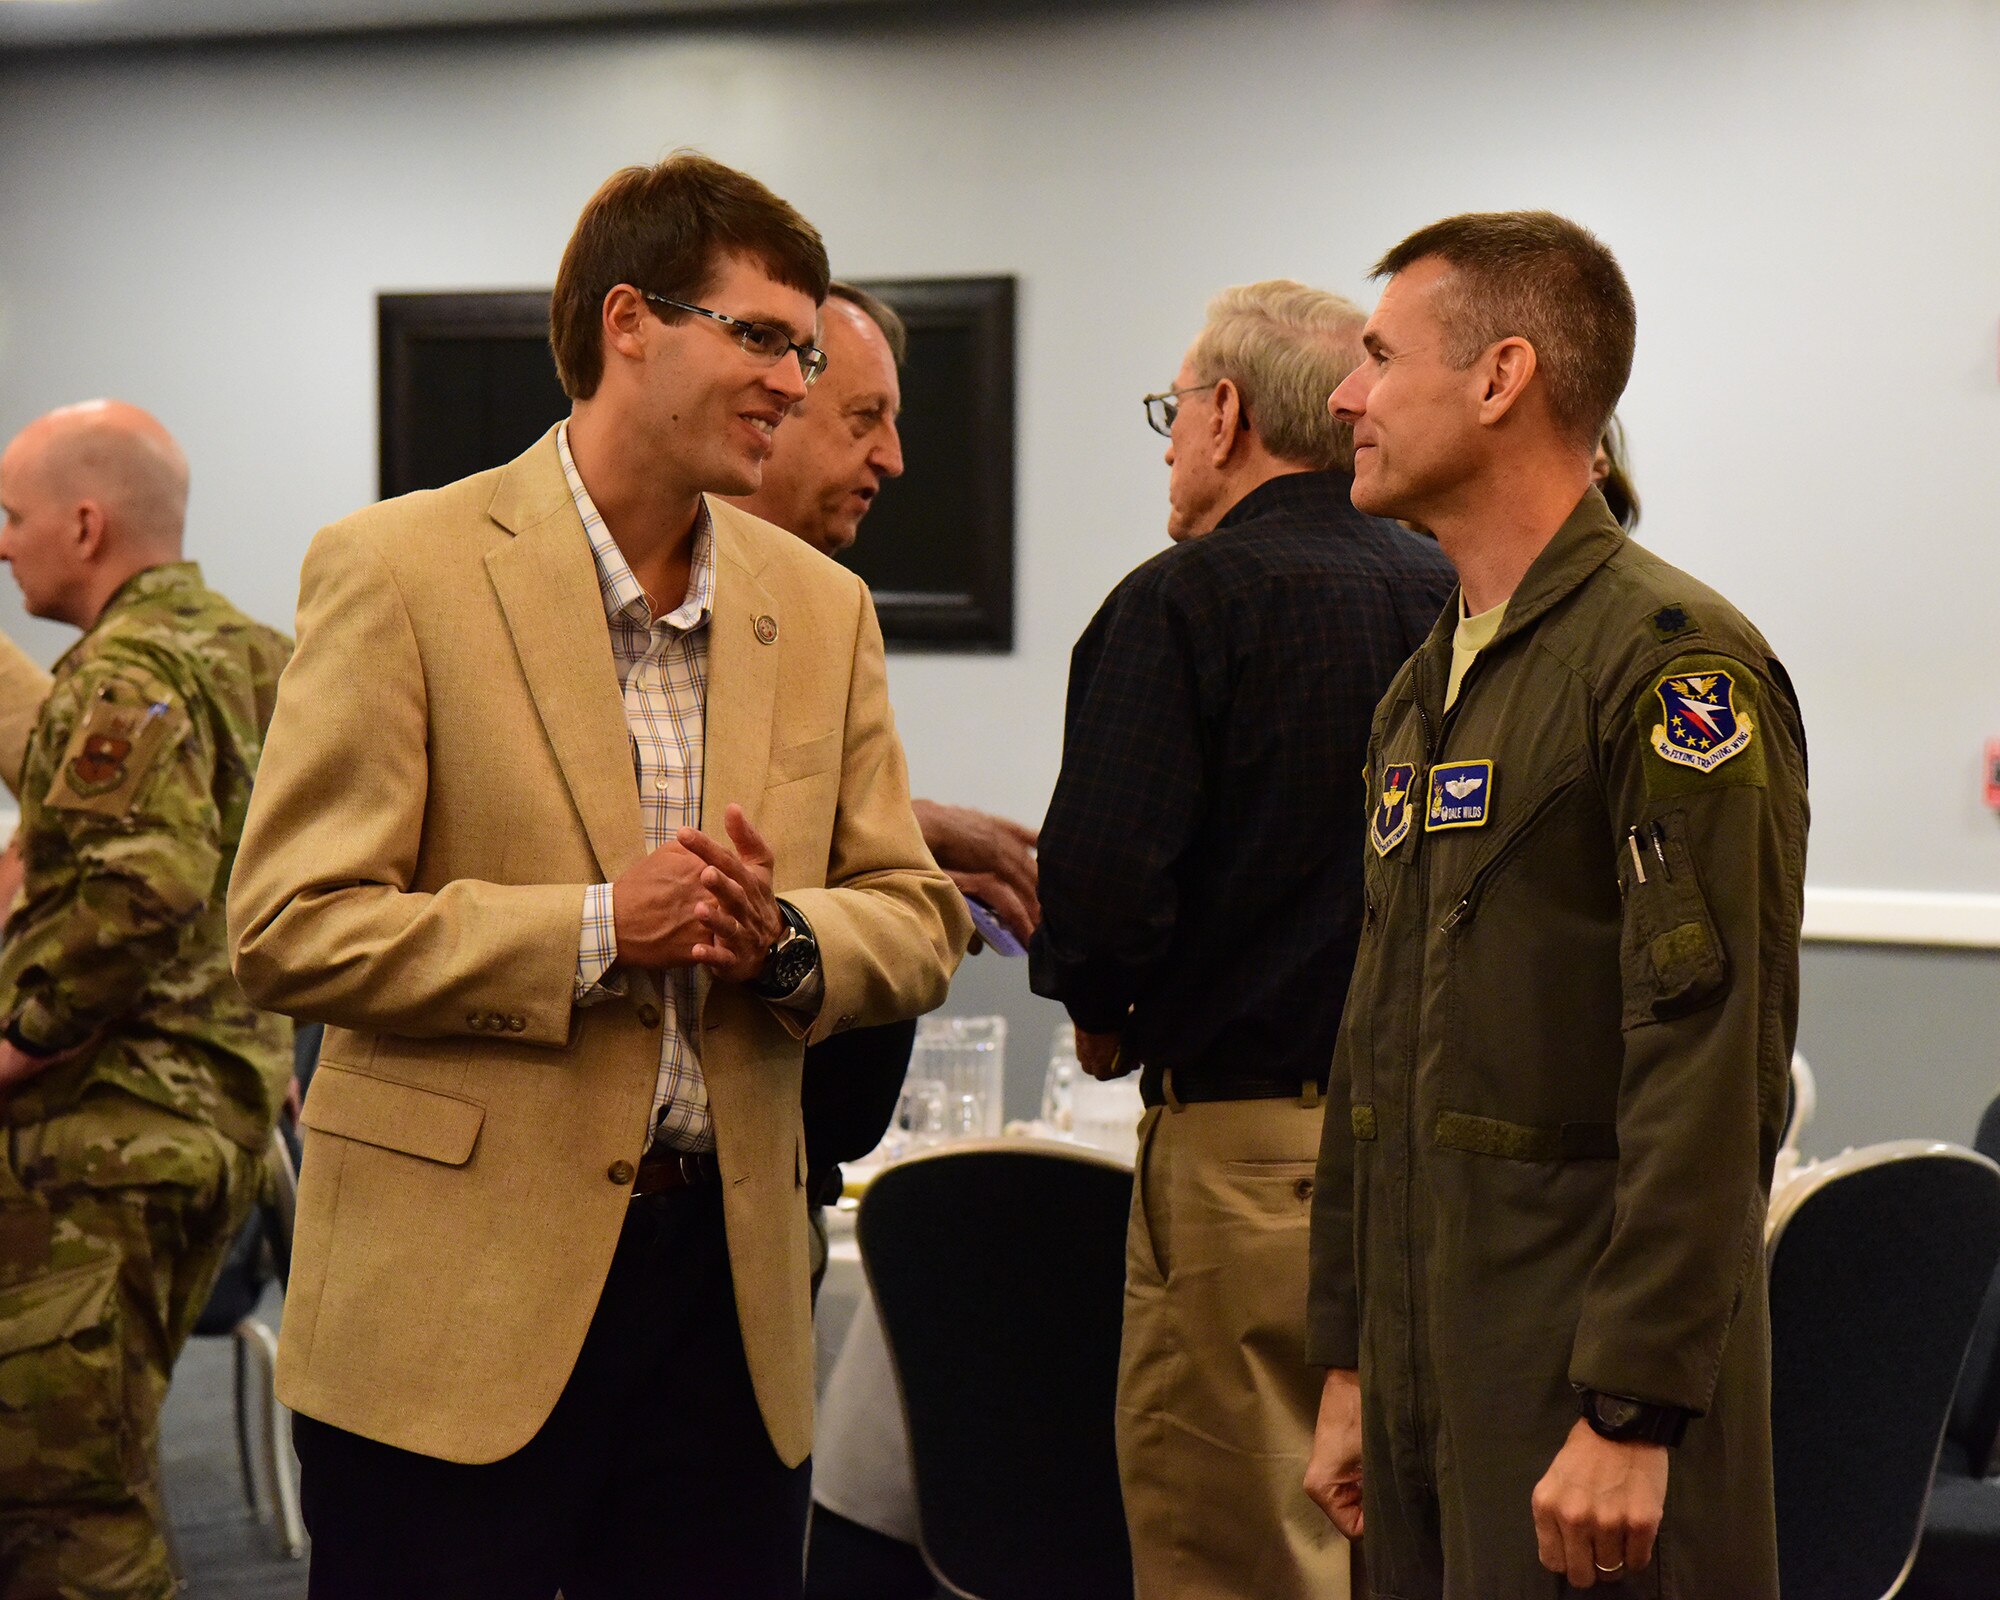 Mr. Greg Alston, field representative for Senator Cindy Hyde-Smith, and Lt Col Nathan Wilds, , 50th Flying Training Squadron commander and guest speaker for the quarterly Base Community Council meeting, talk after lunch Sept. 10, 2019 on Columbus Air Force Base, Miss. (U.S. Air Force photo by Elizabeth Owens)